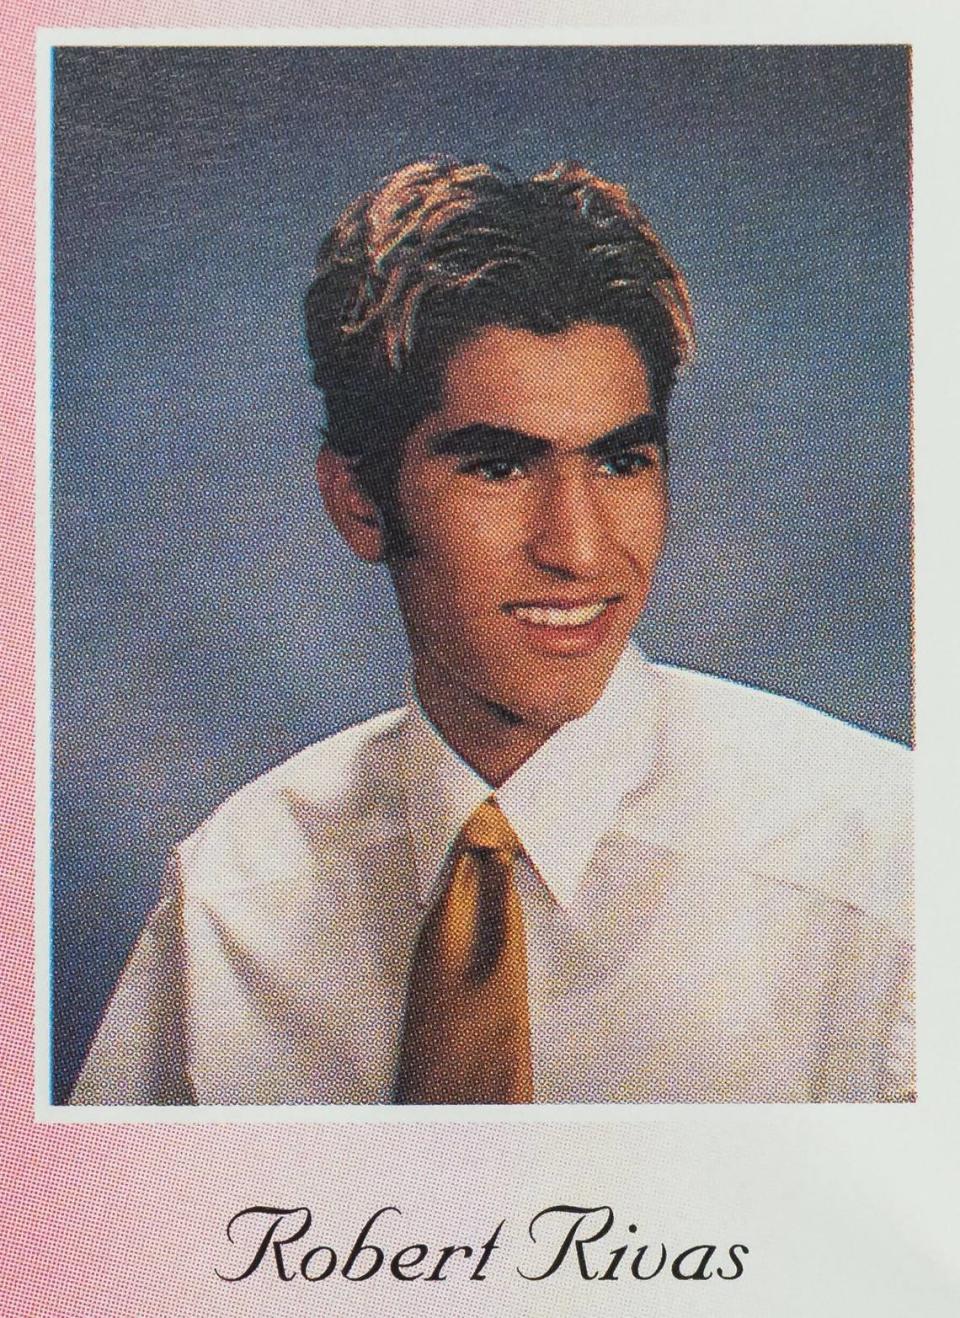 The senior photo of California Assembly Speaker-elect Robert Rivas, D-Salinas, is seen in the 1998 yearbook from Hollister High School, previously San Benito High School.